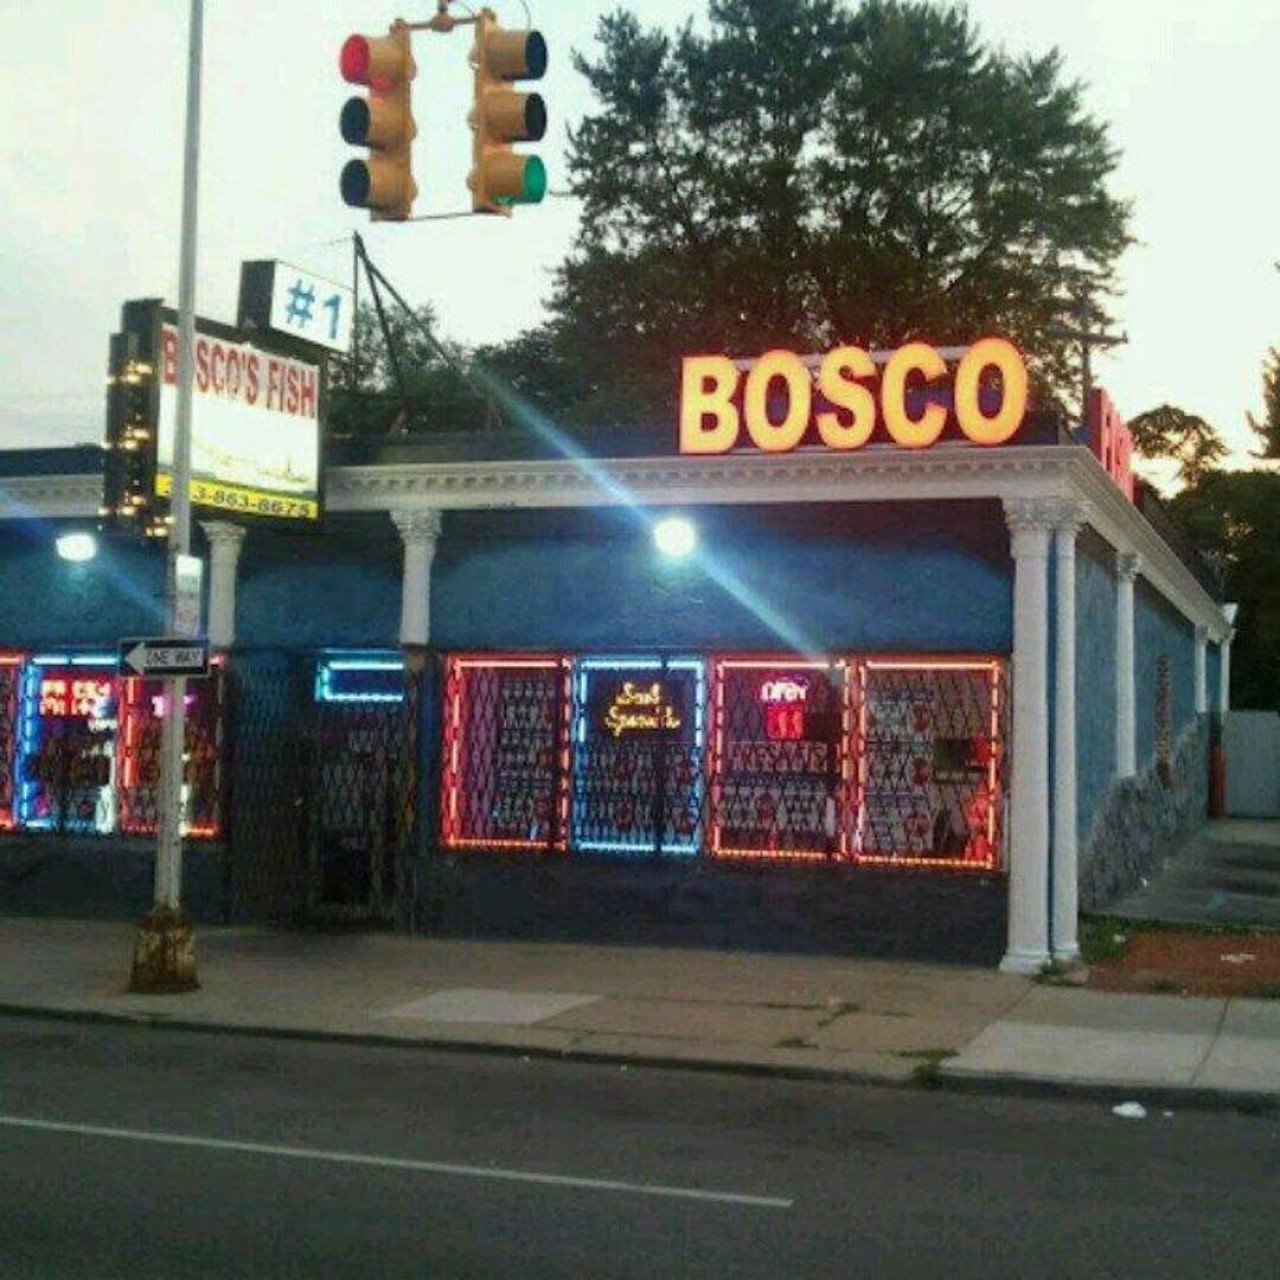 Bosco Fish and Seafood
16227 Livernois Ave., Detroit; 313-863-8675 
Bosco serves up five pieces of fish (you can choose from tilapia, ocean perch, white fish, smelt, and more) with fries, coleslaw, and a complimentary can of pop.
Photo via  Bosco Fish / Facebook 